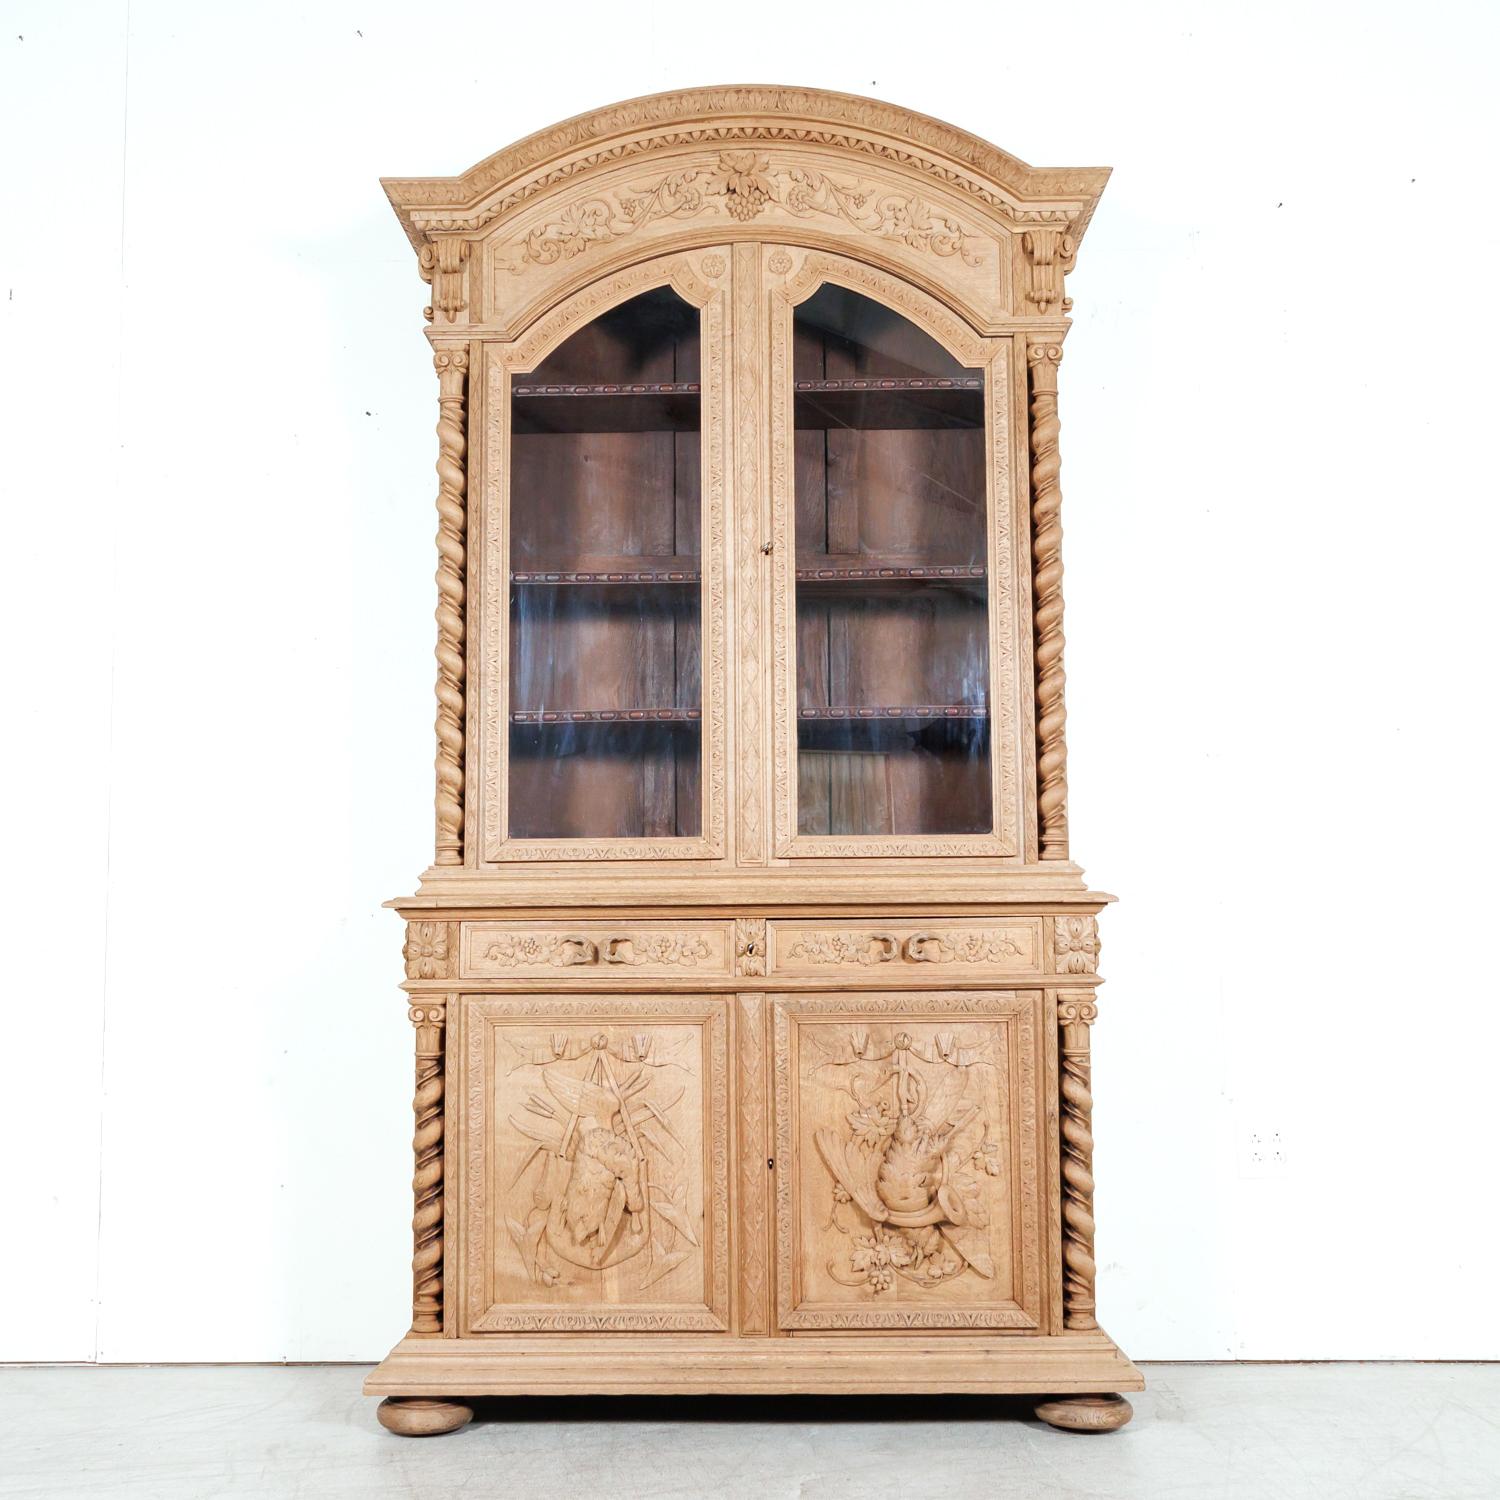 A handsome mid-19th century French Louis XIII style carved hunting buffet deux corps or bibliothèque de chasse, circa 1850s, handcrafted in Lyon of solid oak that has been bleached, allowing the carved motifs of the antique cabinet to gain